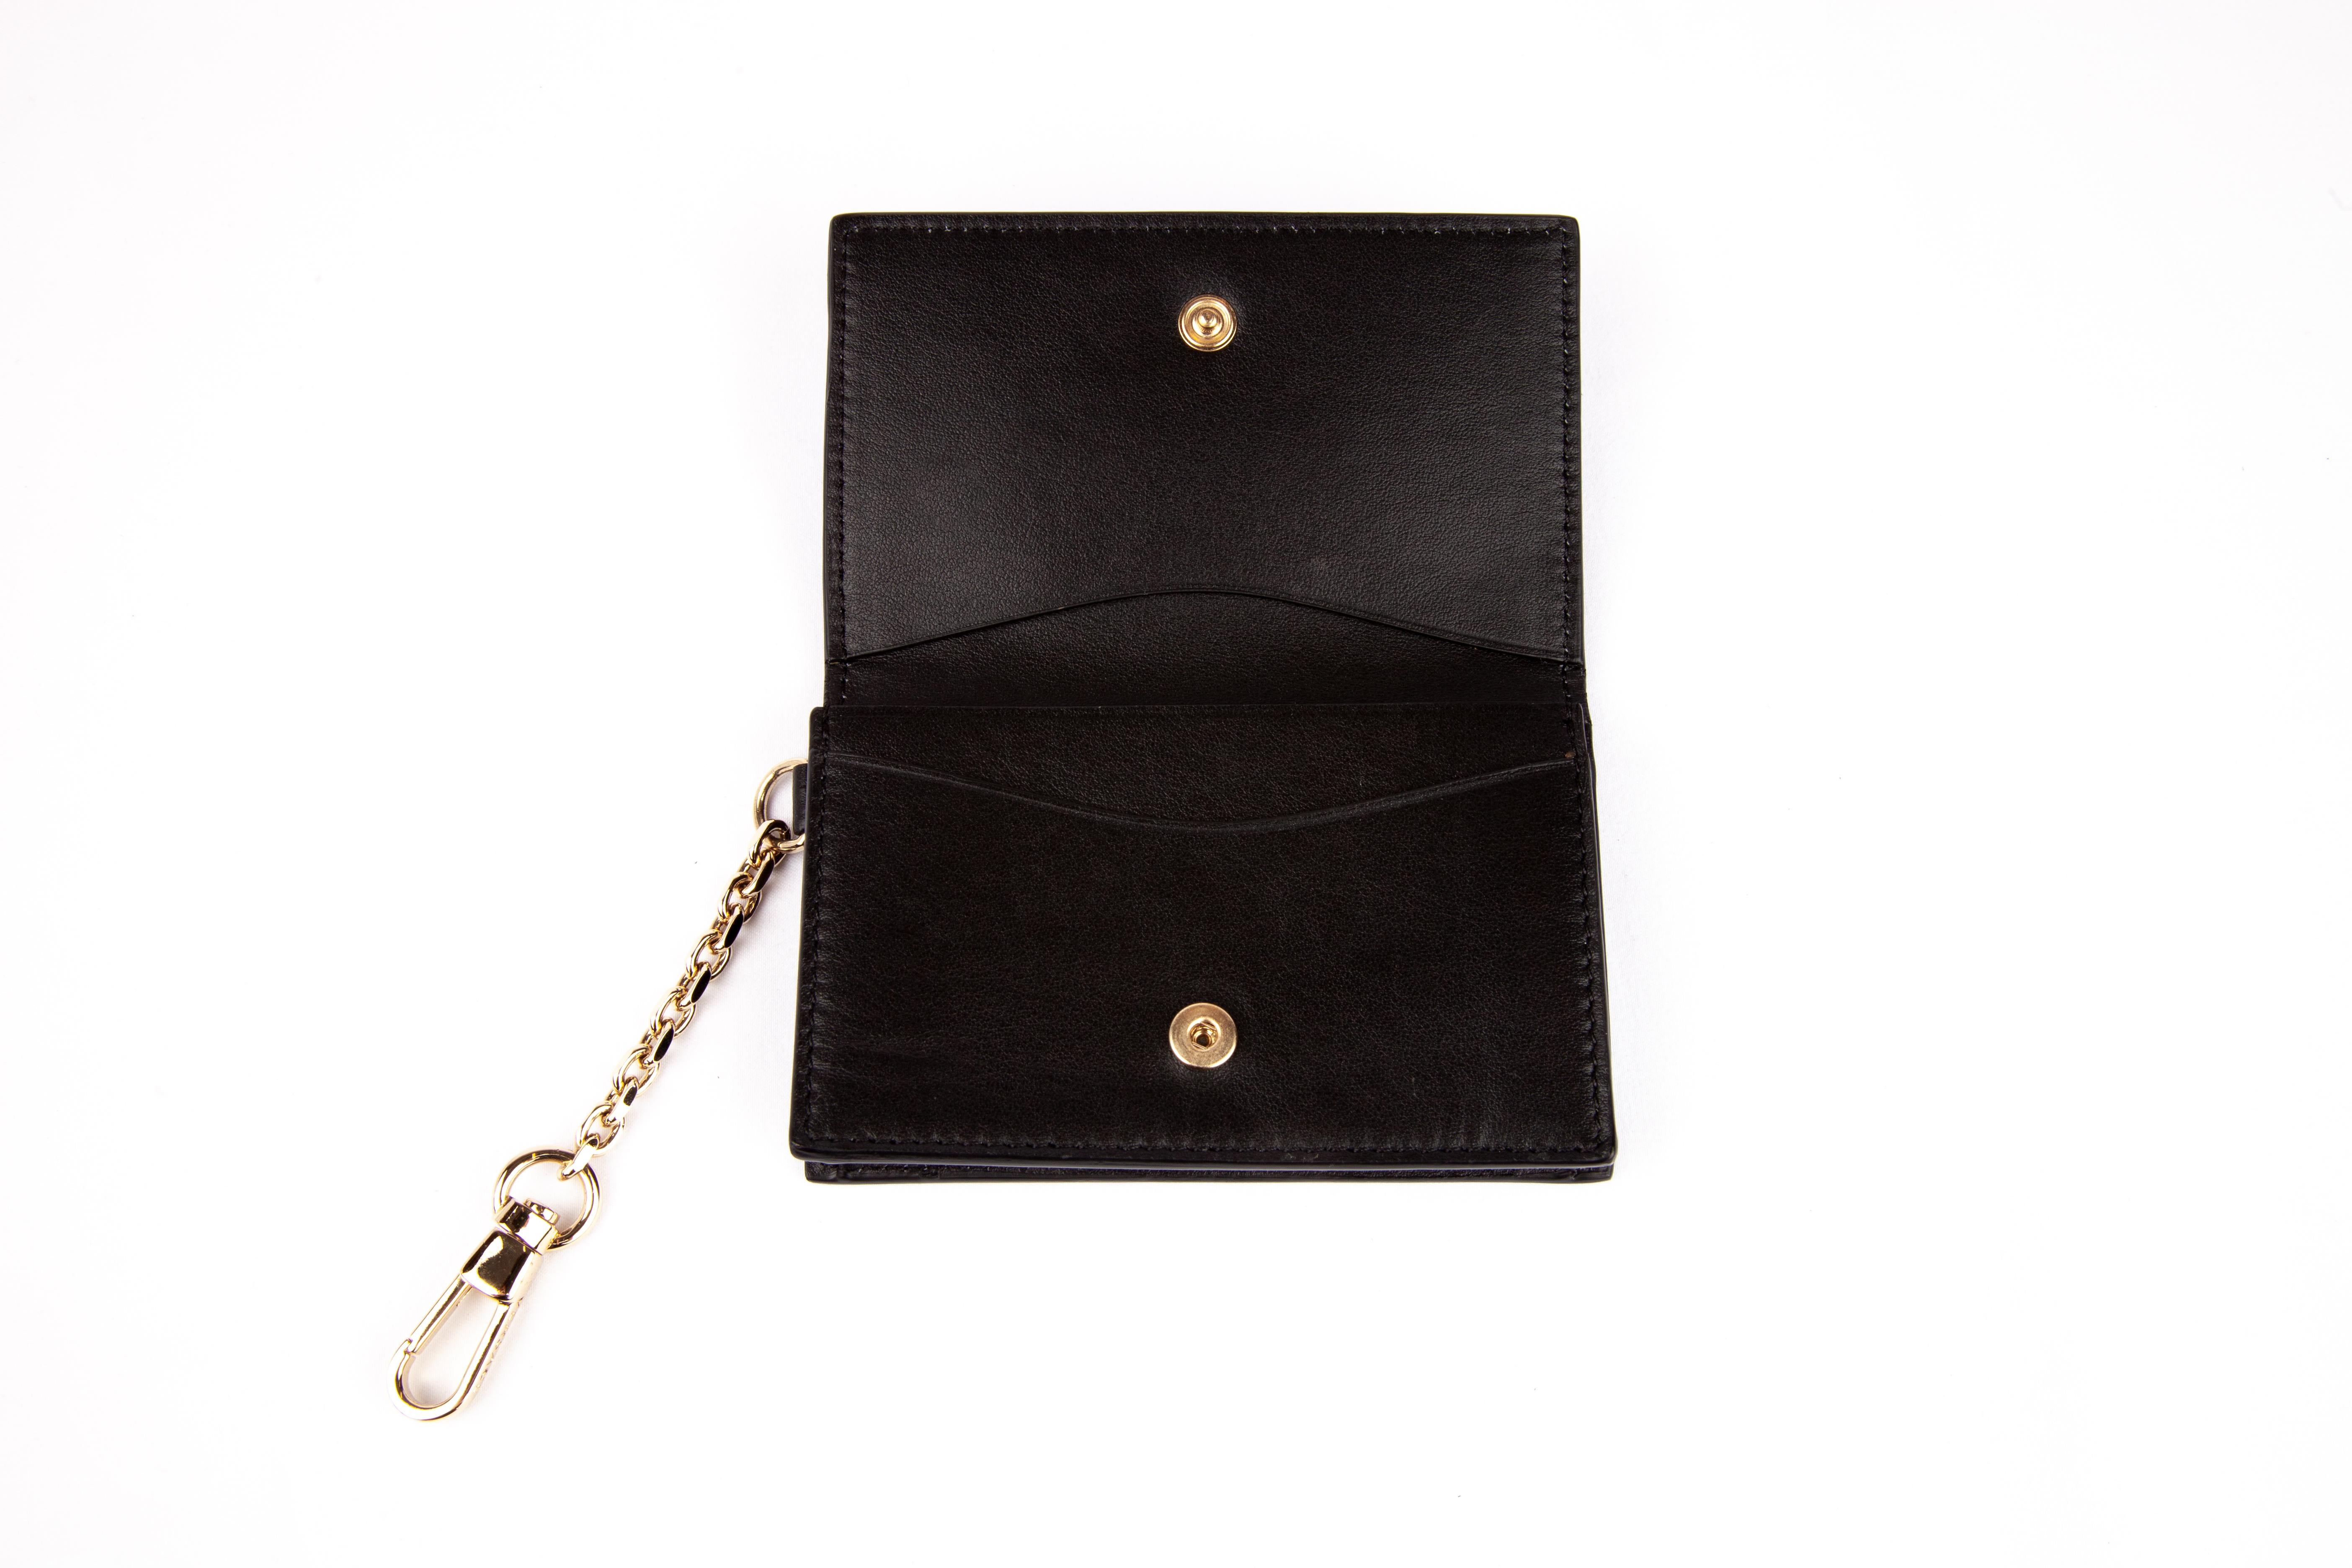 Women's Versace Black Crystal Embellished Card Holder / Bag Charm with Gold Tone Chain